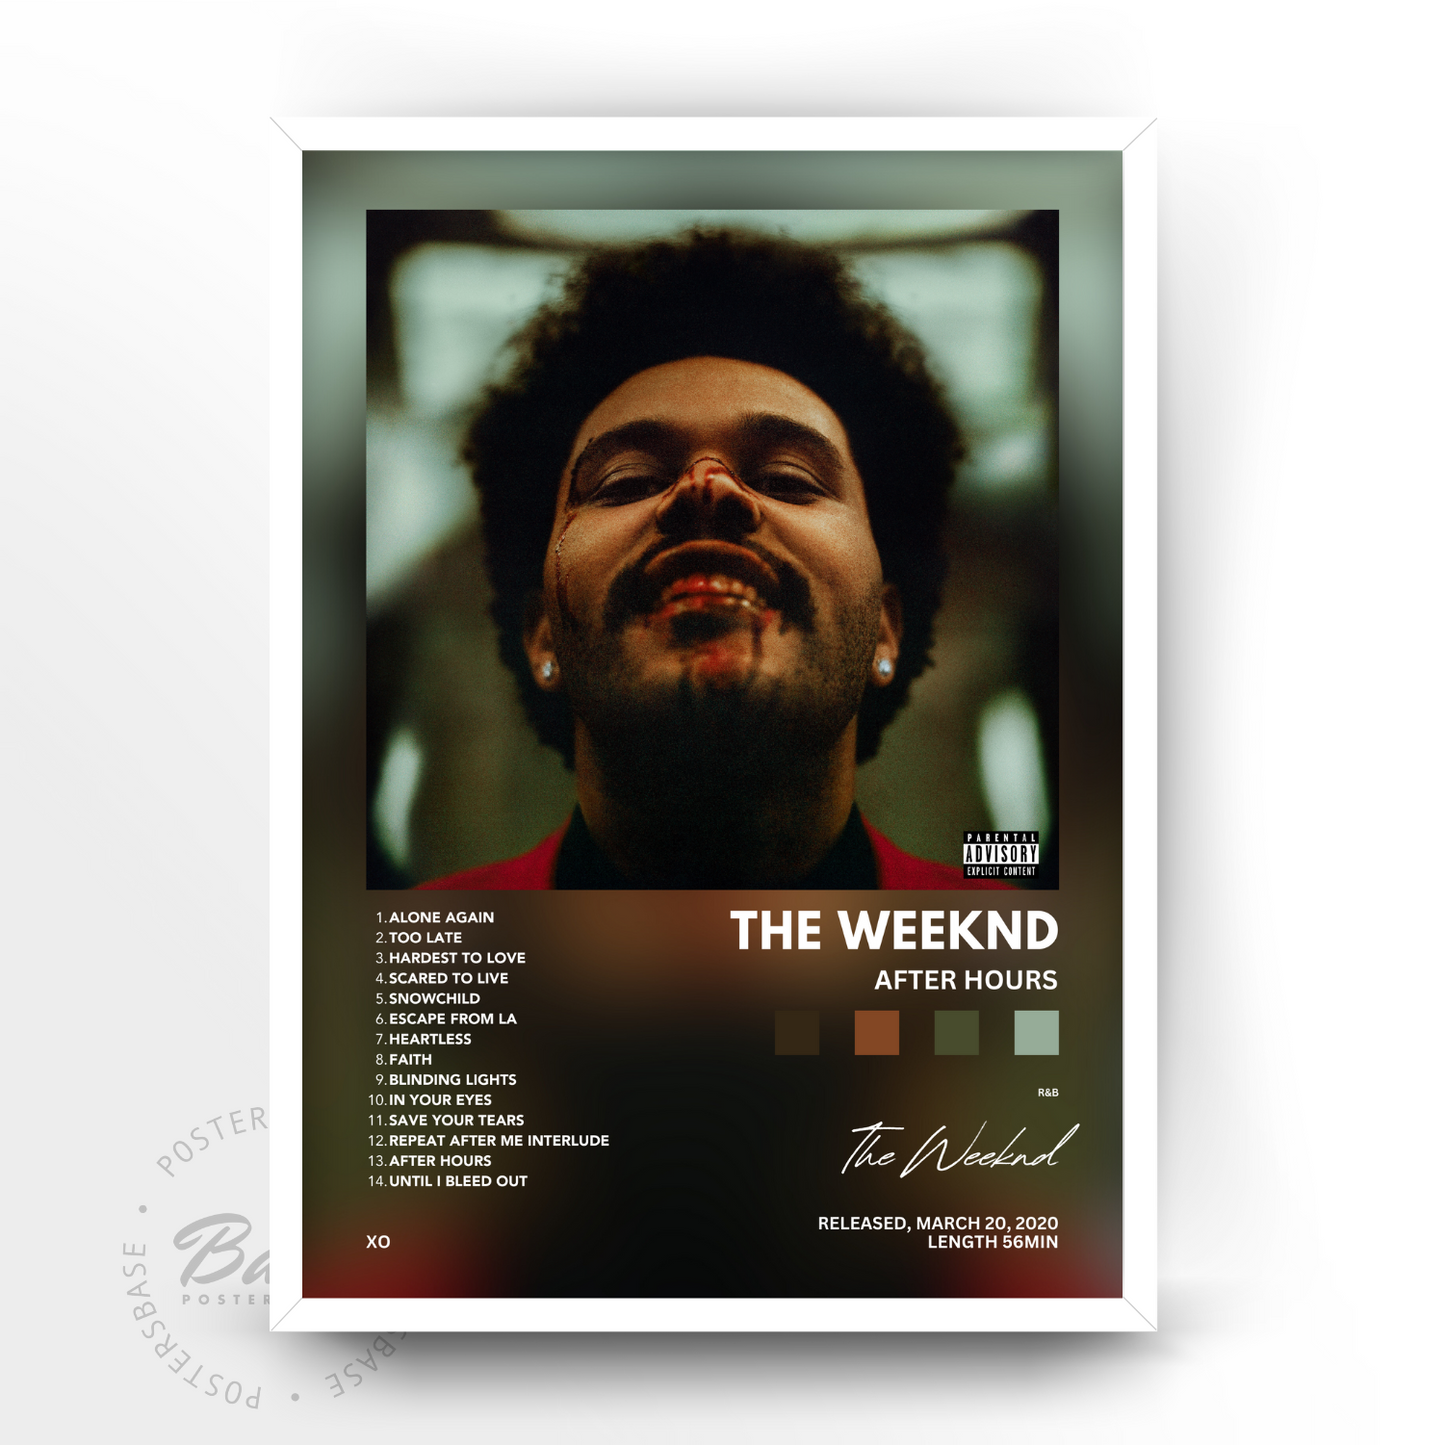 The Weeknd 'After Hours'